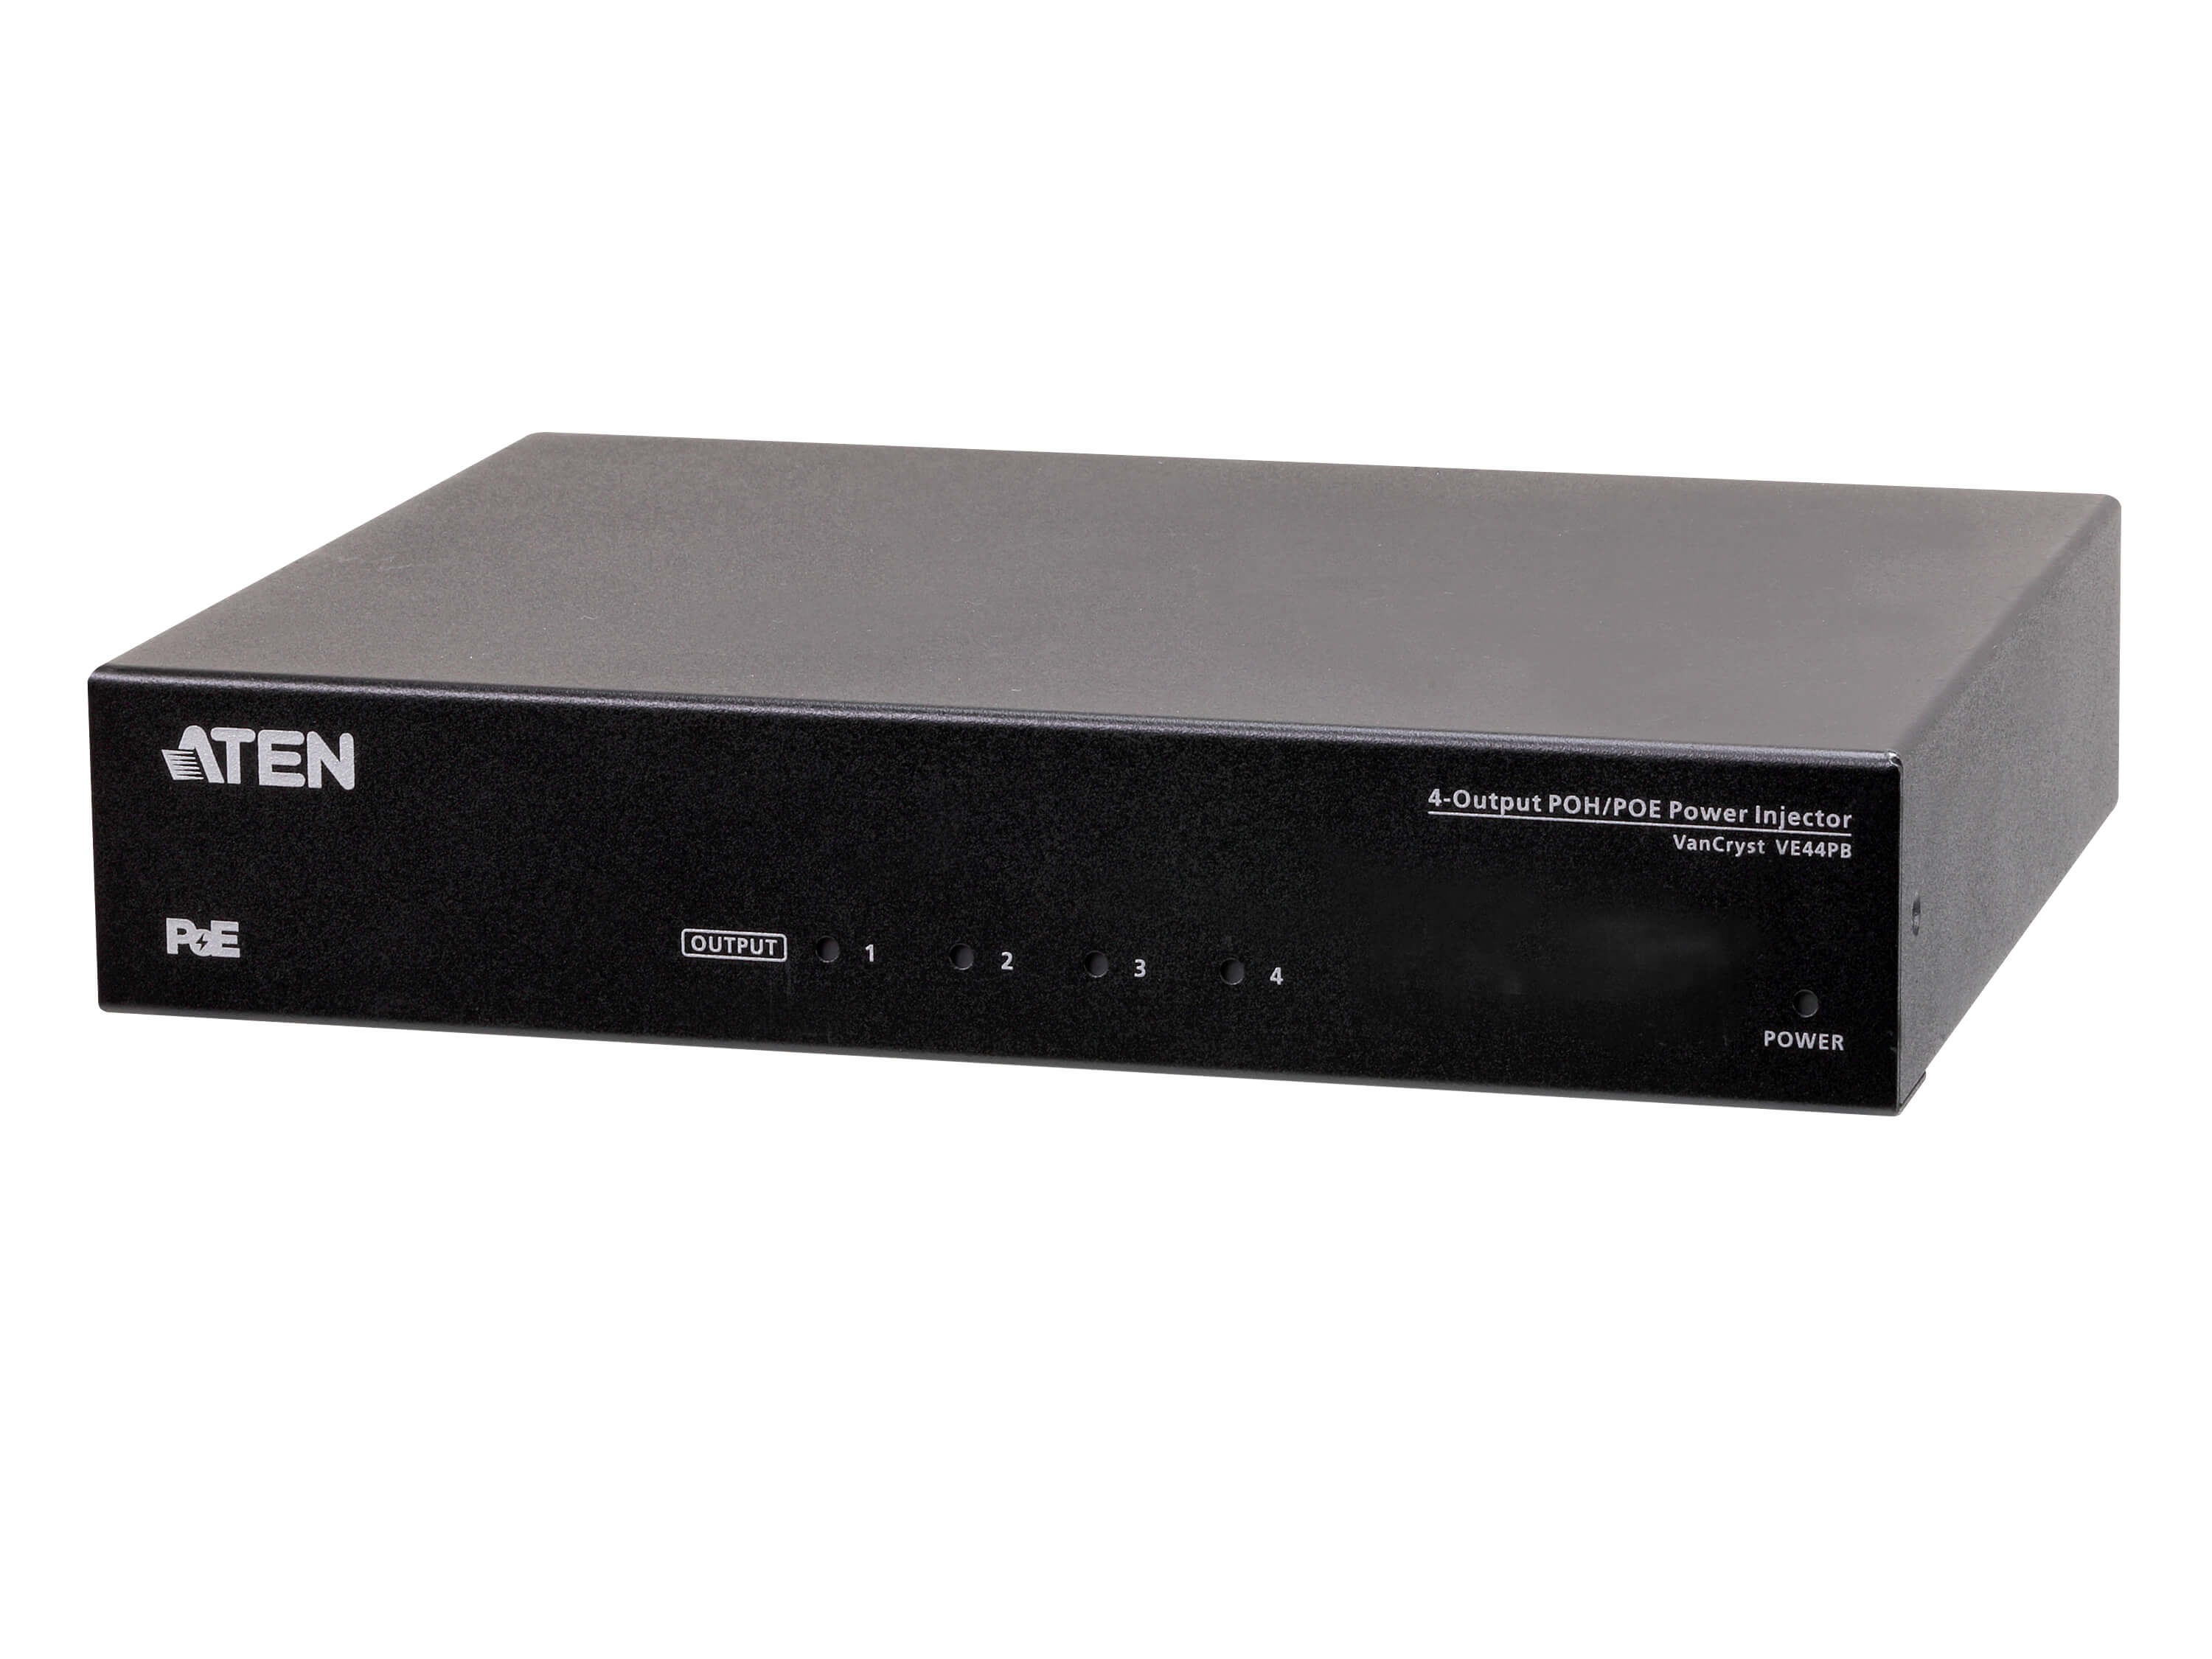 VE44PB 4-Output PoH/PoE Power Injector by Aten